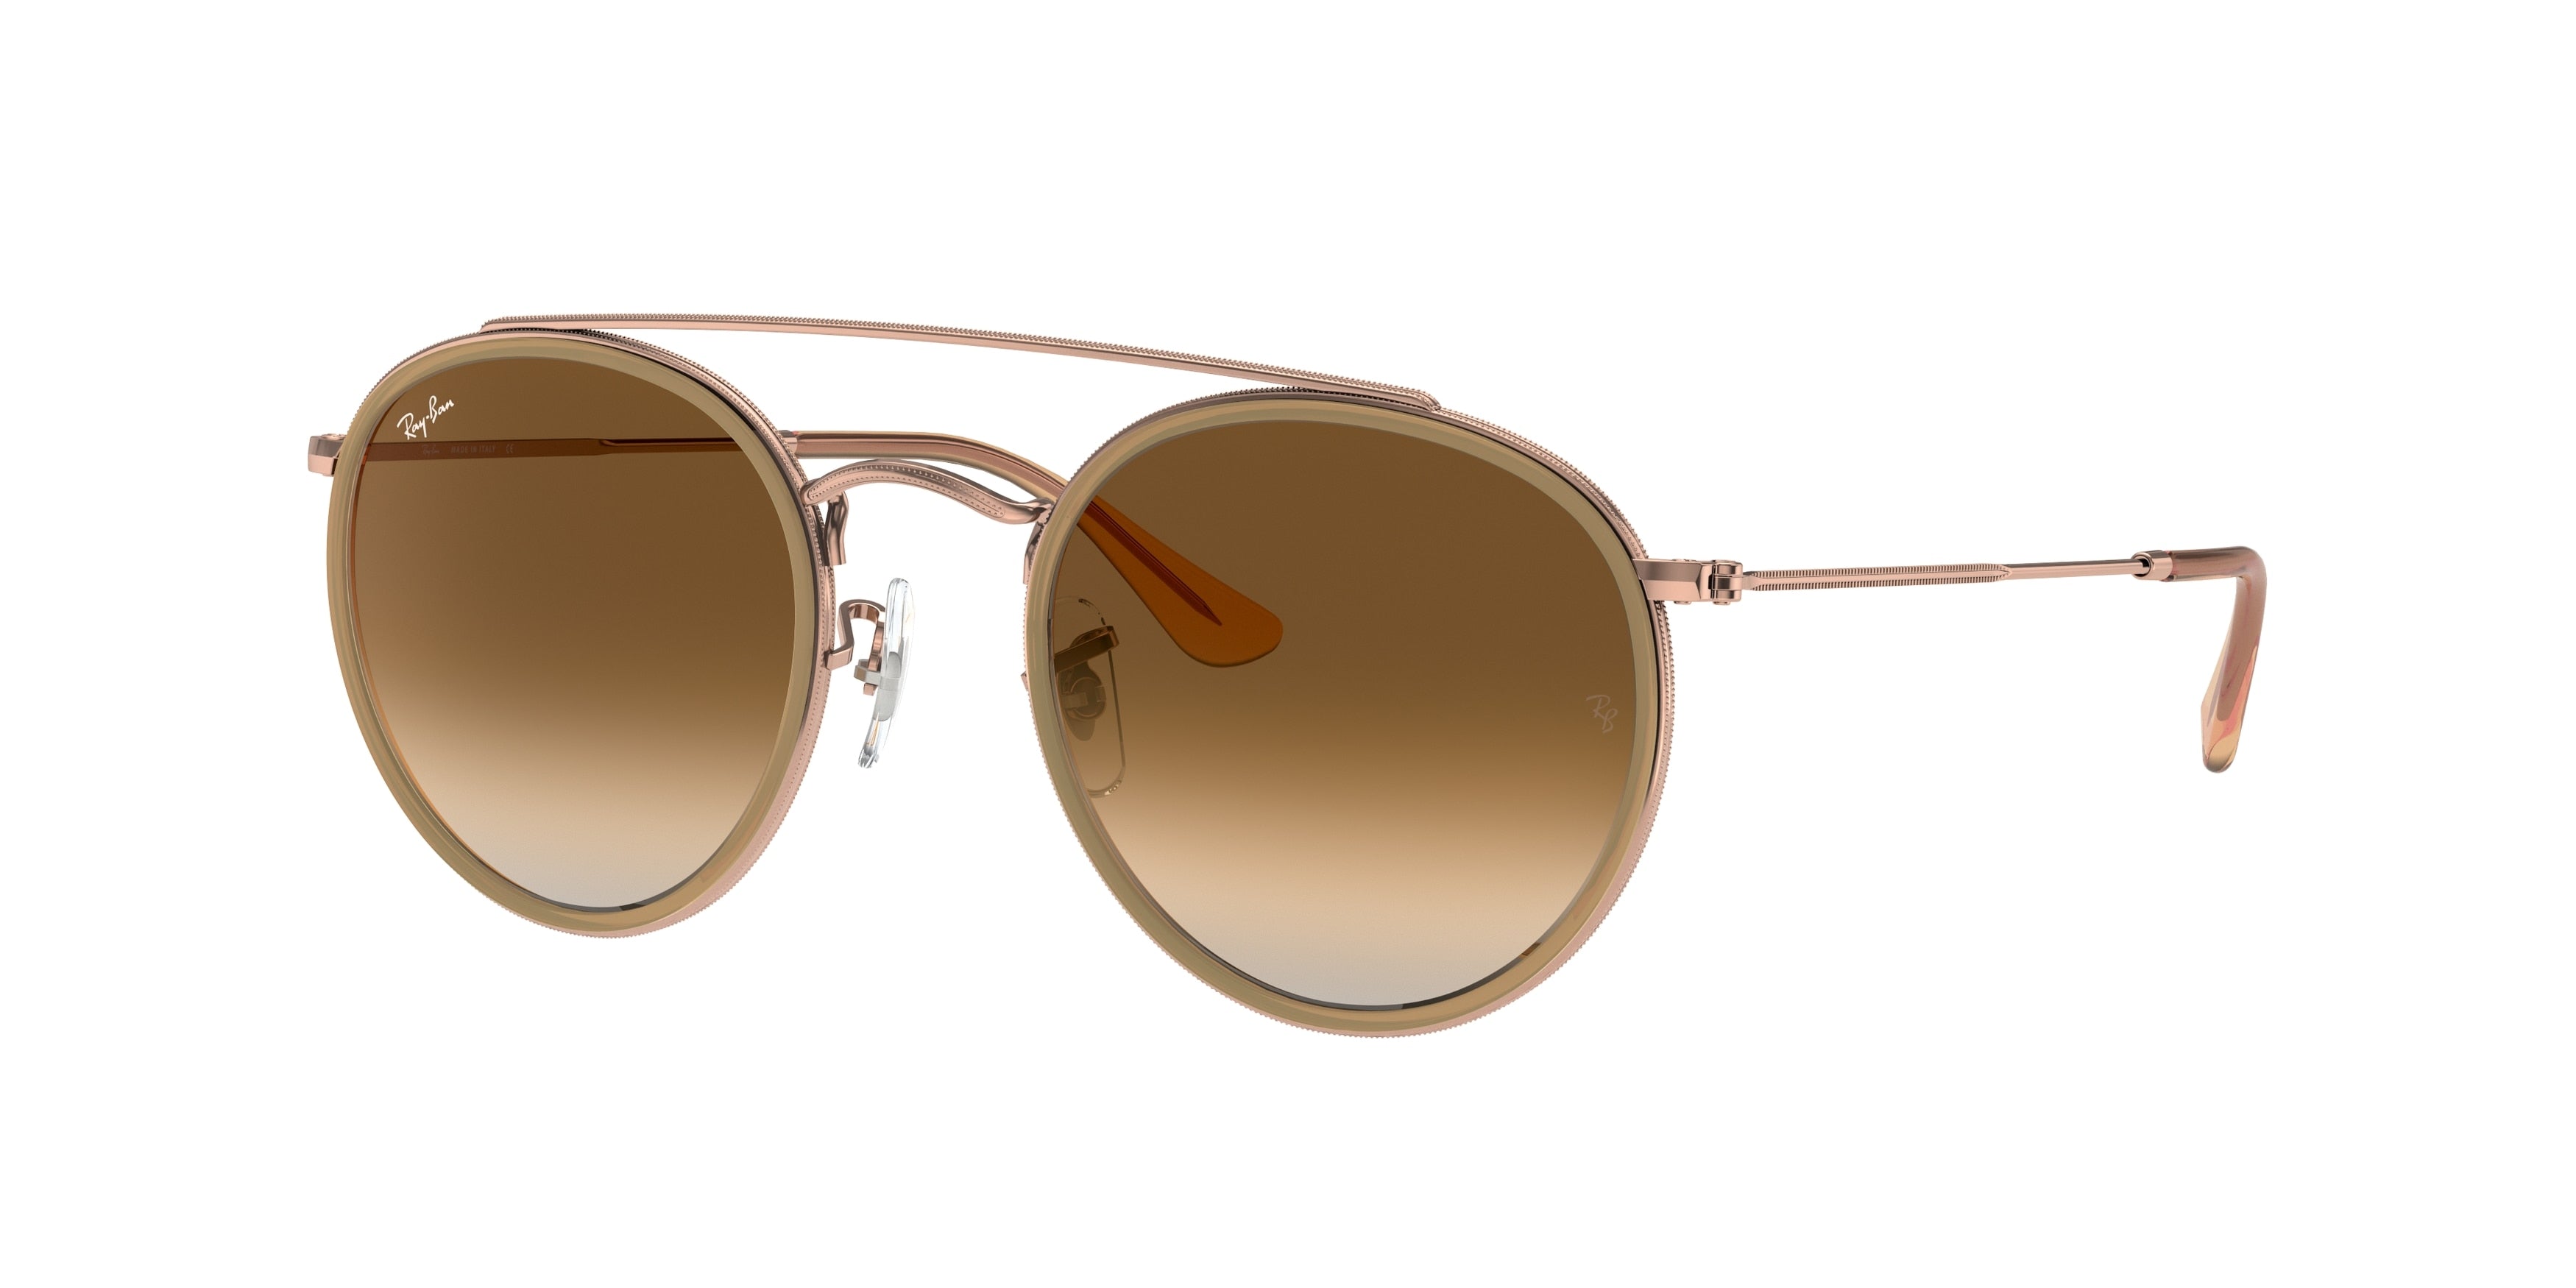 Ray-Ban RB3647N Round Sunglasses  907051-Copper 51-145-22 - Color Map Copper